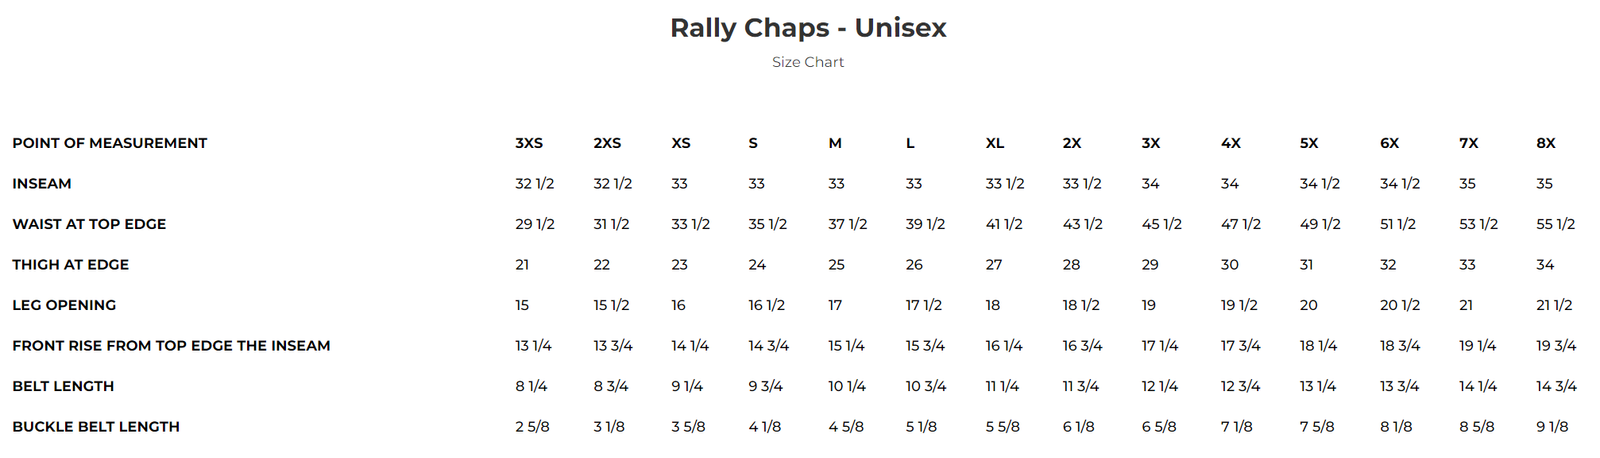 Size chart for Rally leather chaps.